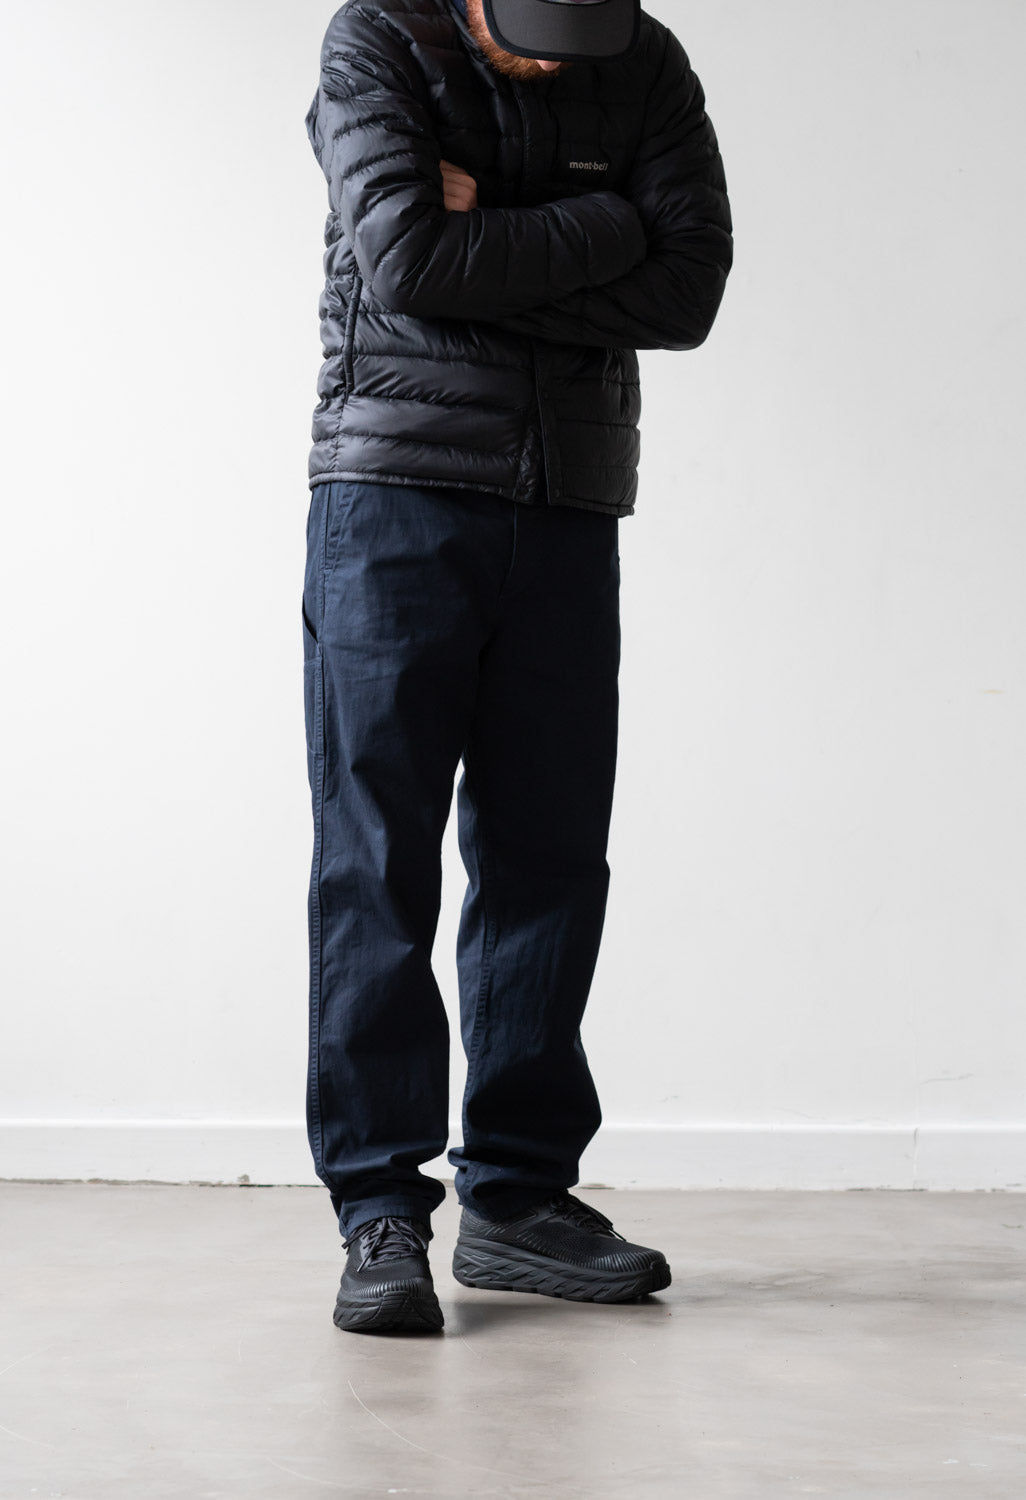 orSlow French Work Pants - Navy